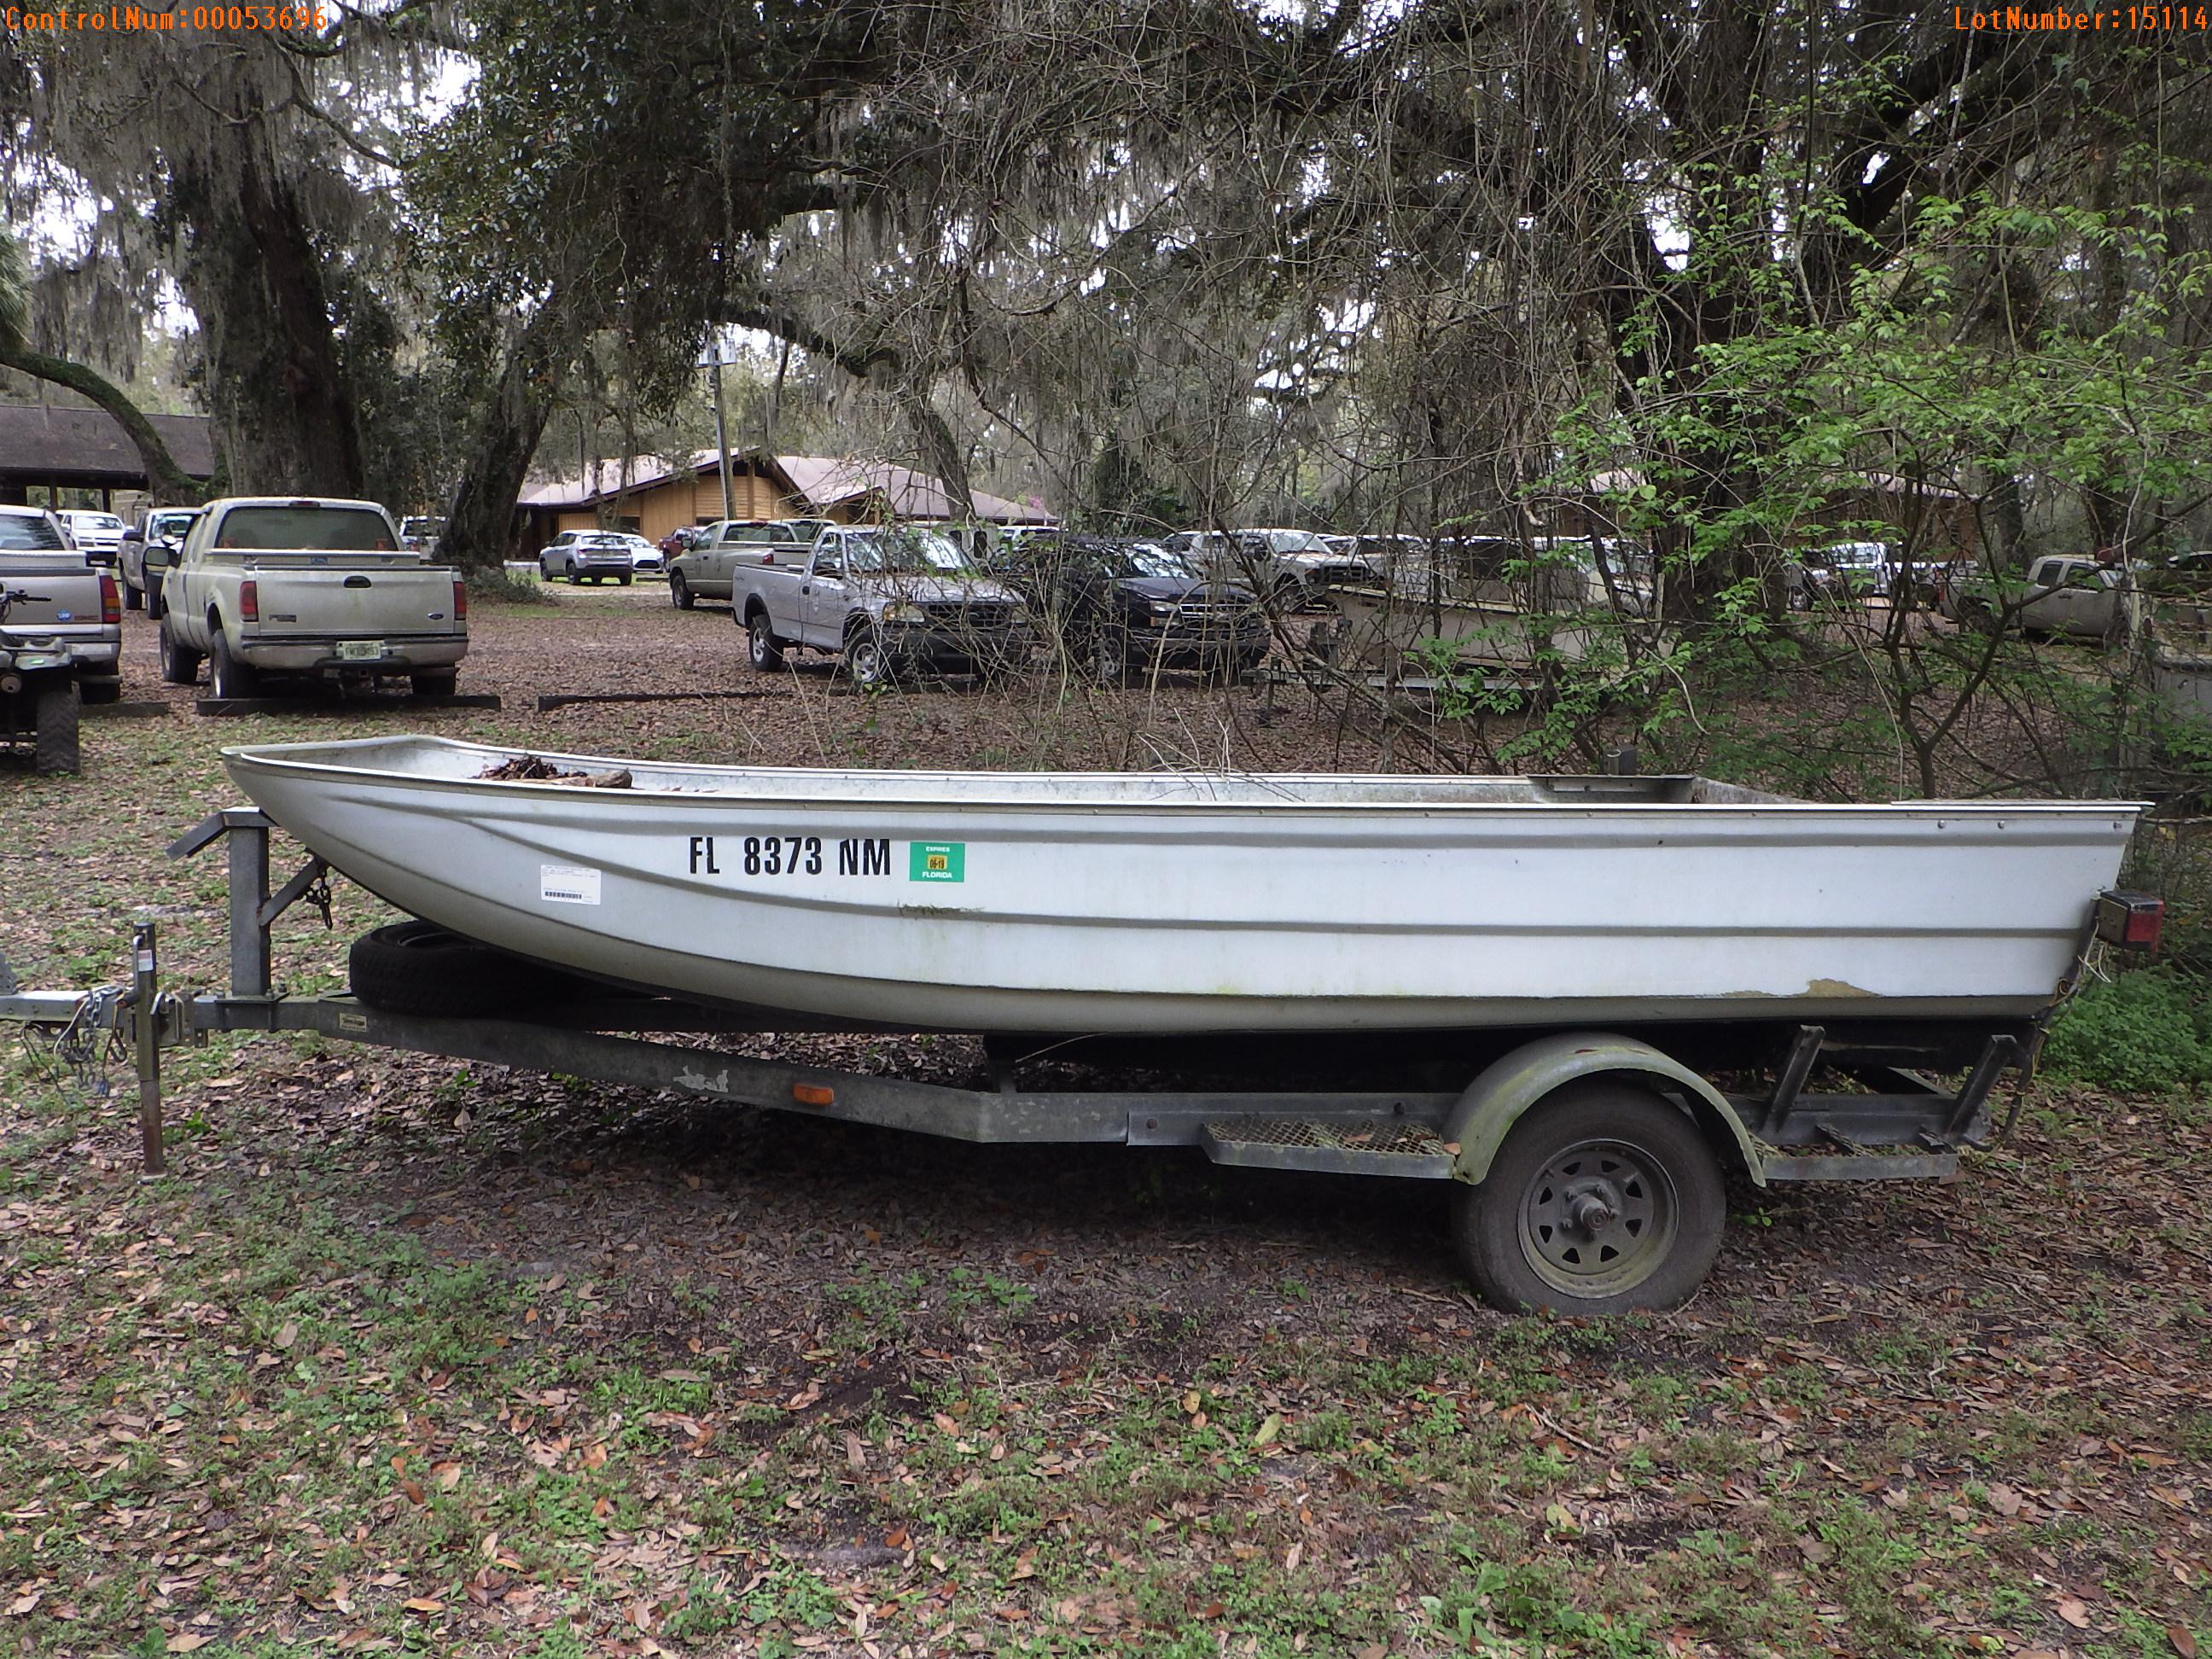 3-15114 (Vessels-Air boat)  Seller: Florida State F.W.C. 2007 SAP AIRBOAT